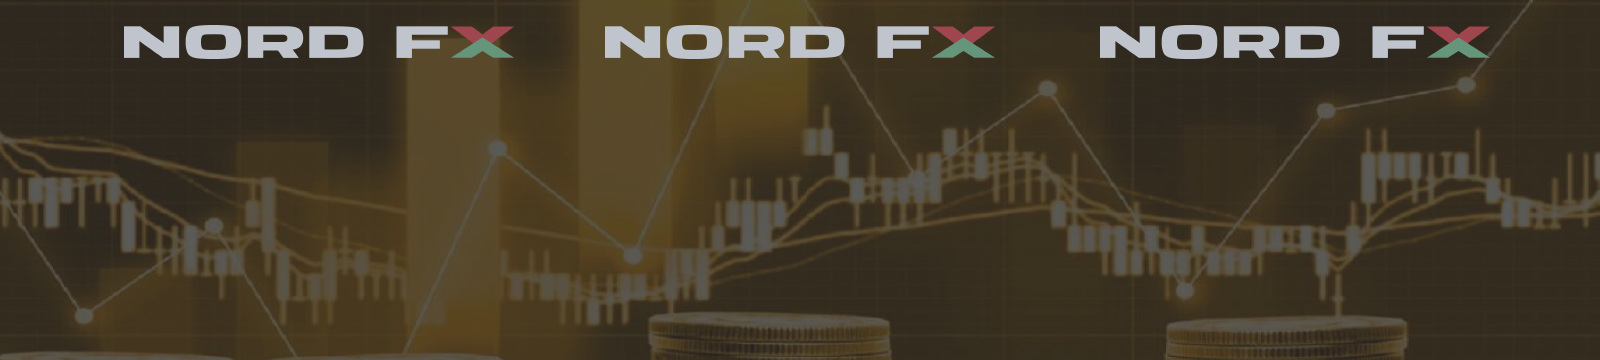 Forex and Cryptocurrency Forecast for May 10 - 14, 2021